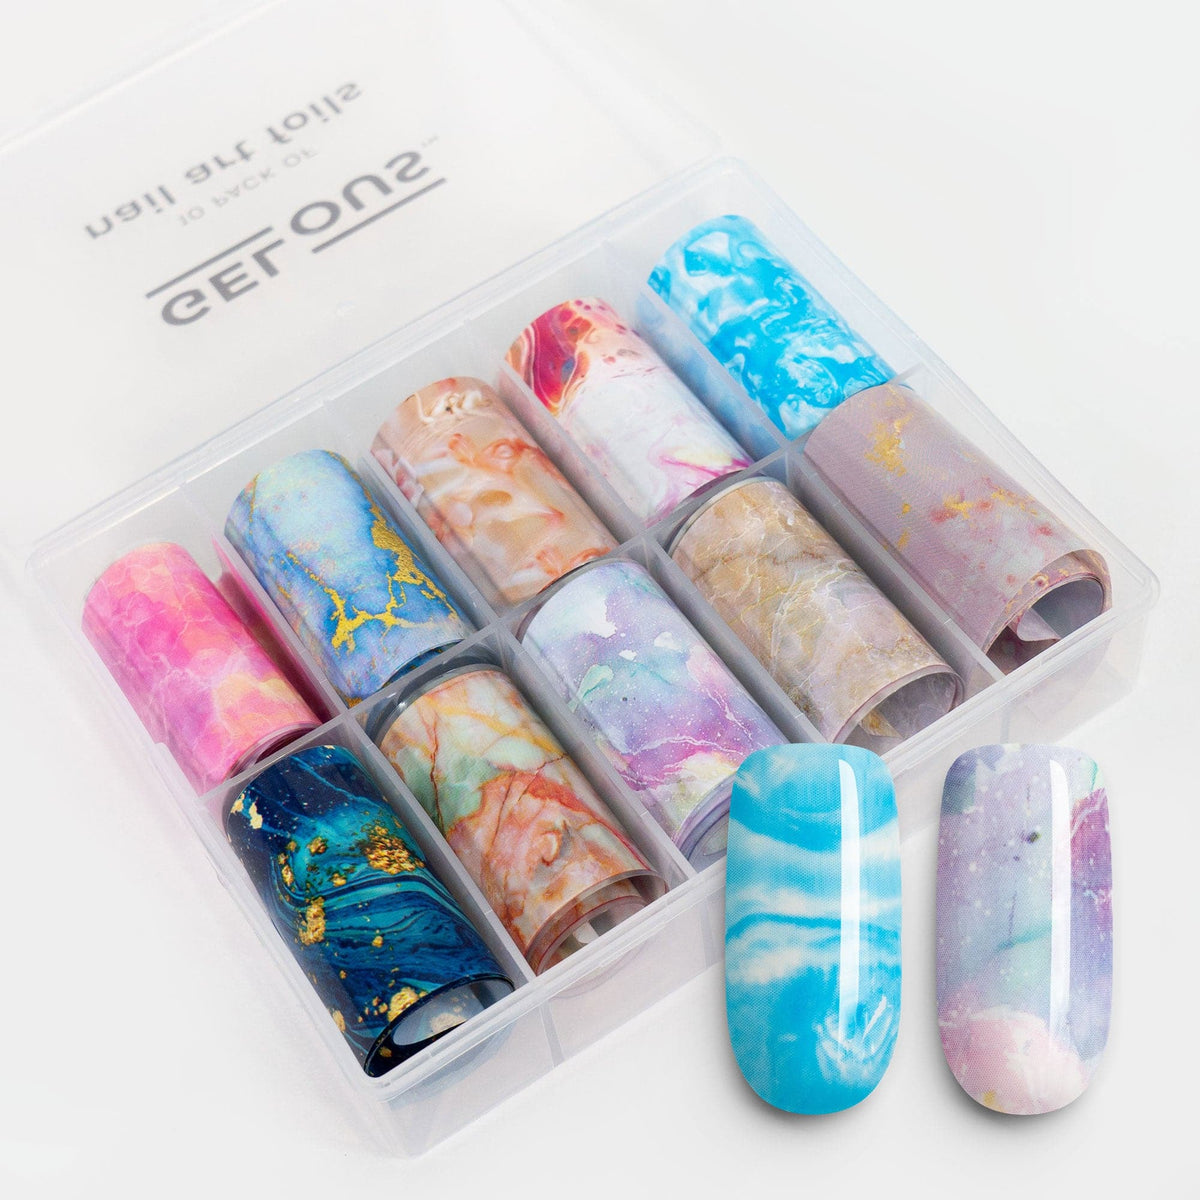 Gelous Marble Nail Art Foils product photo - photographed in Australia